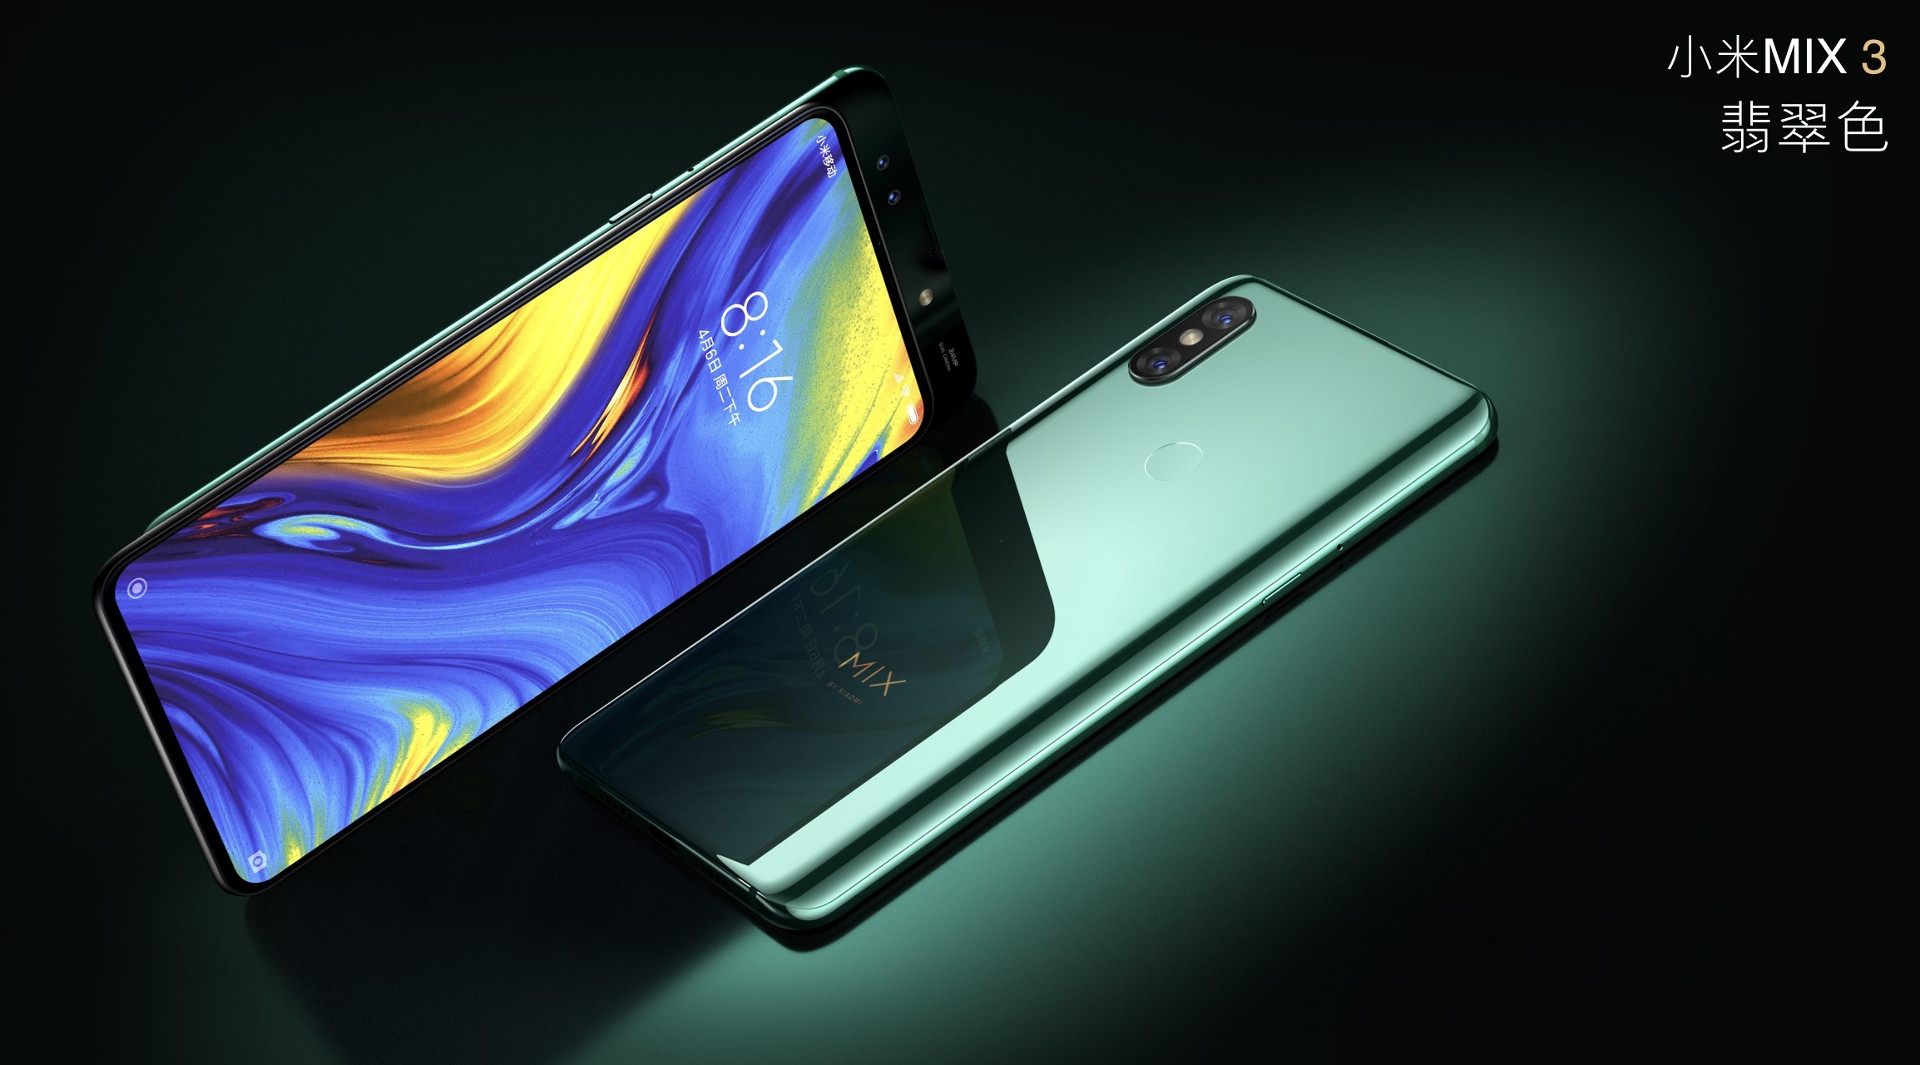 The front and back of the Mi Mix 3.